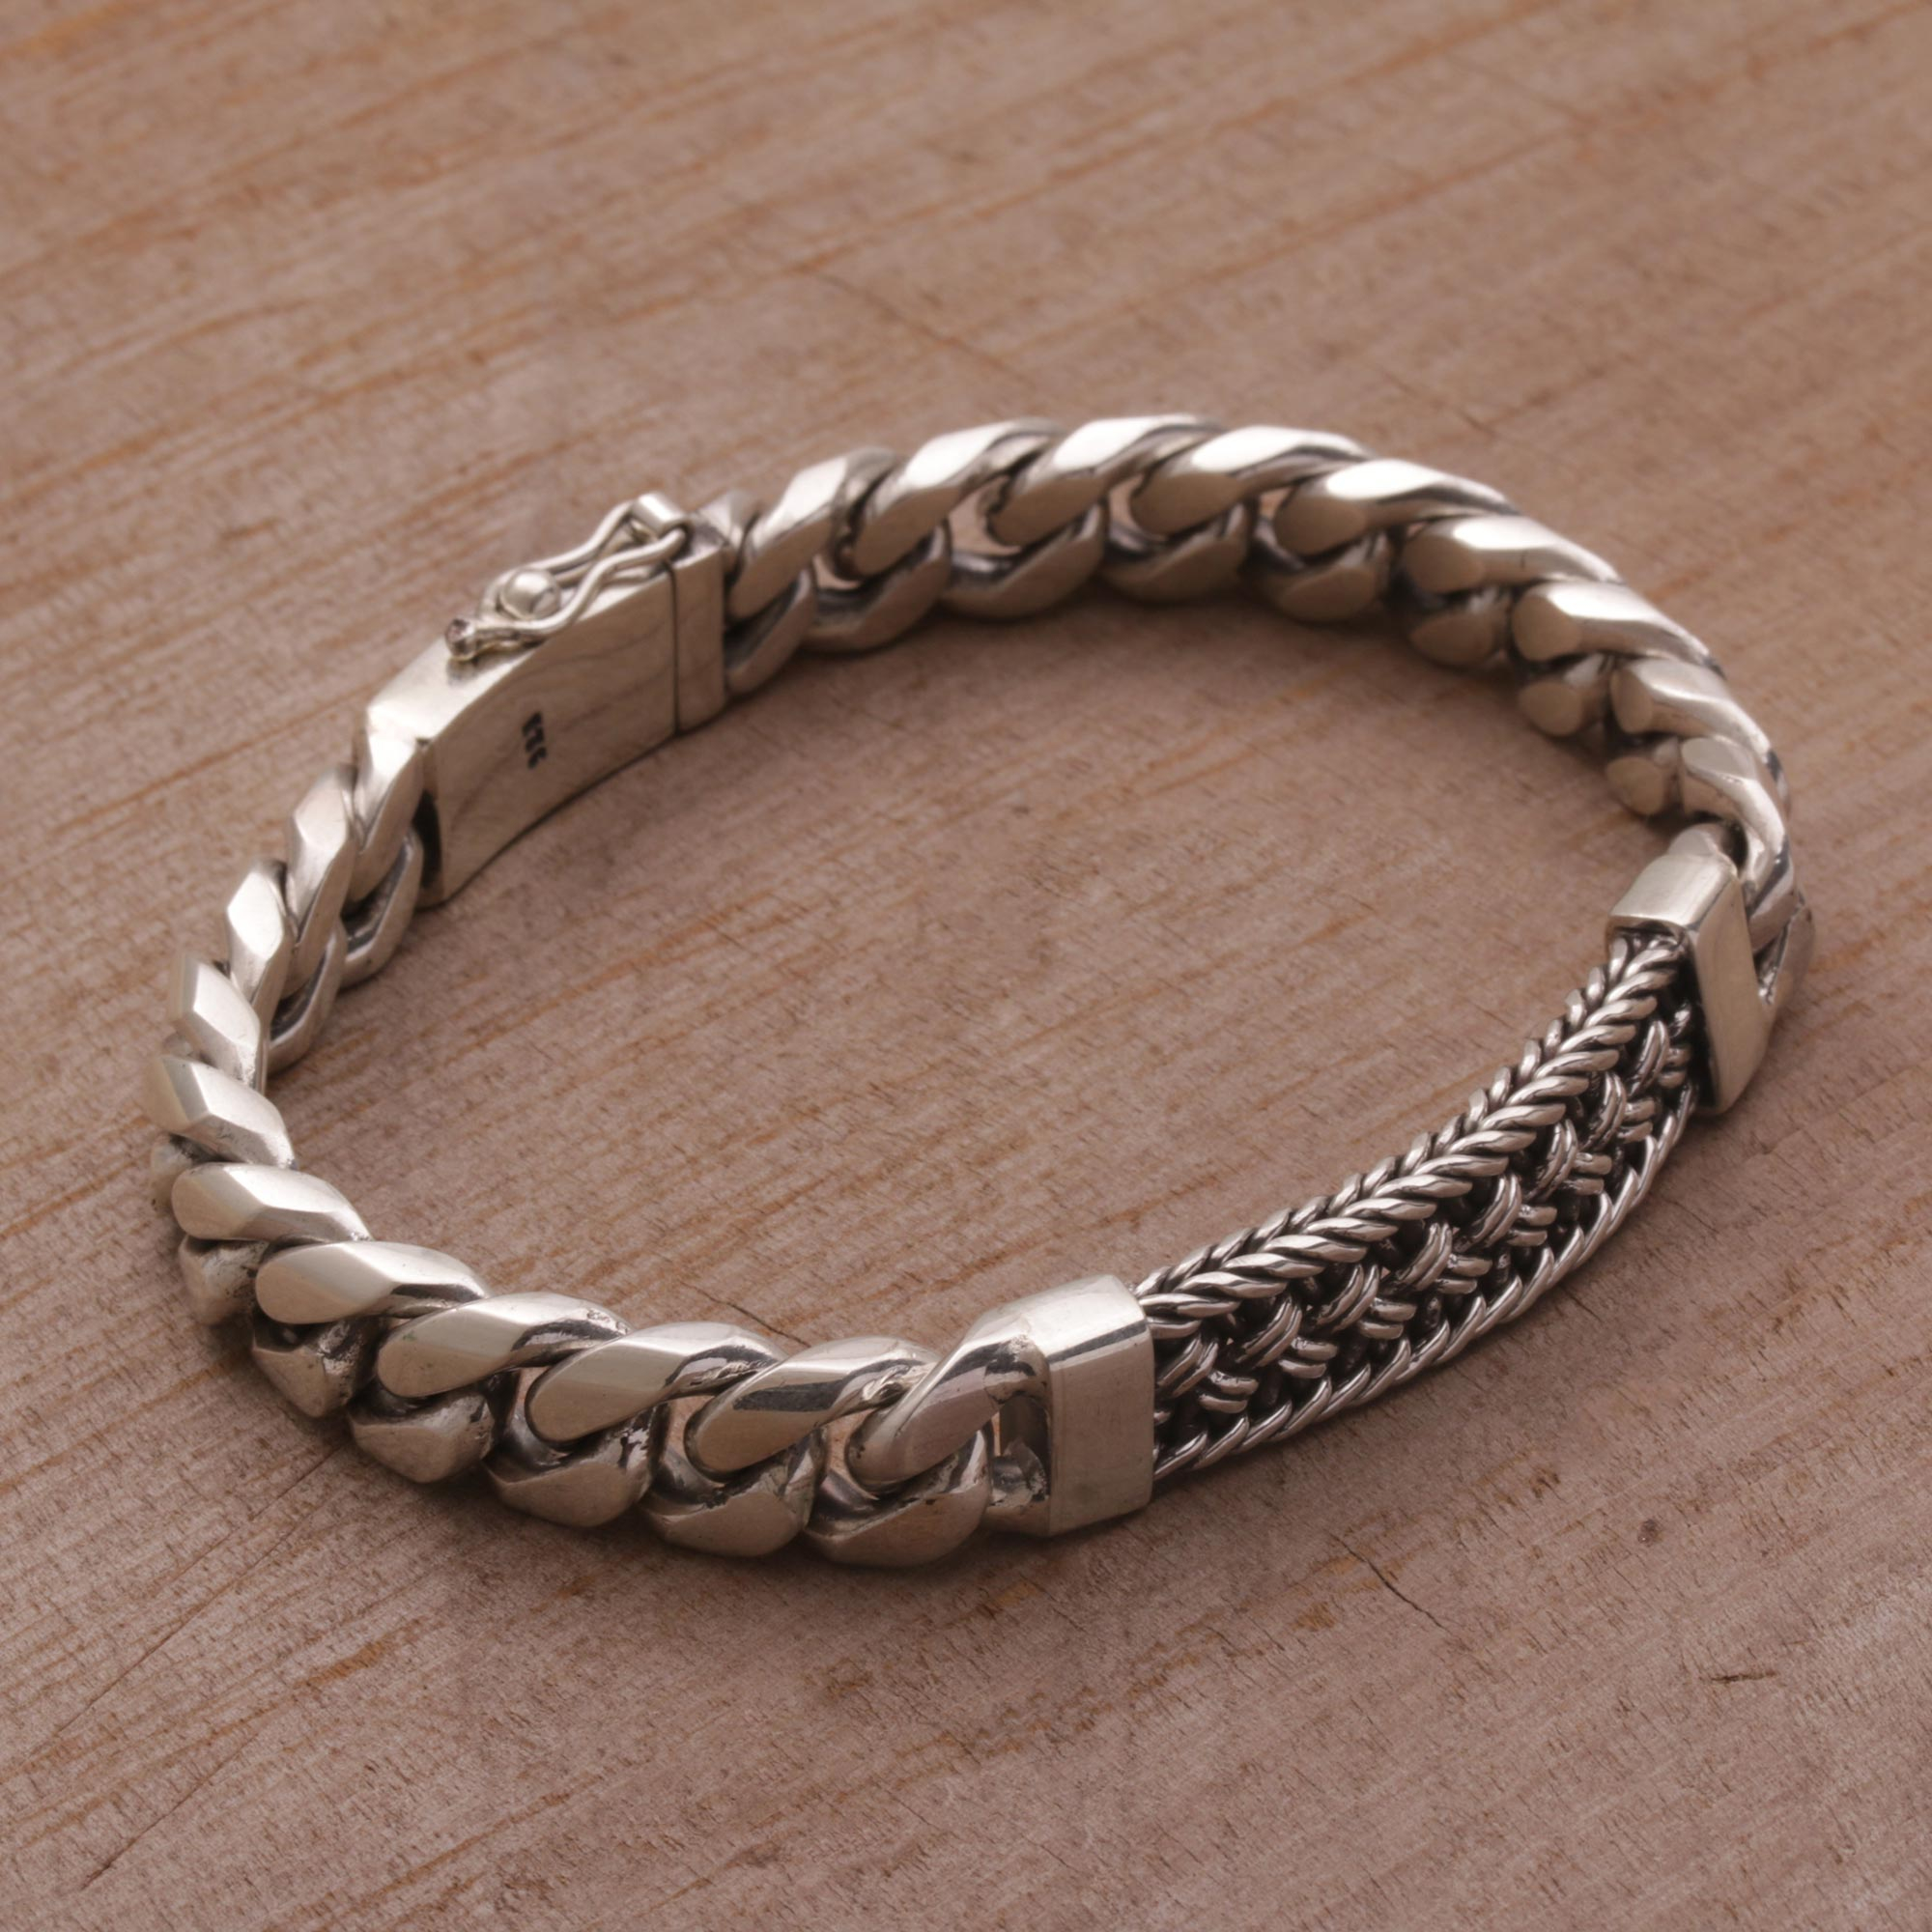 Sterling Silver Braided Wristband Bracelet from Bali - Distinctive ...